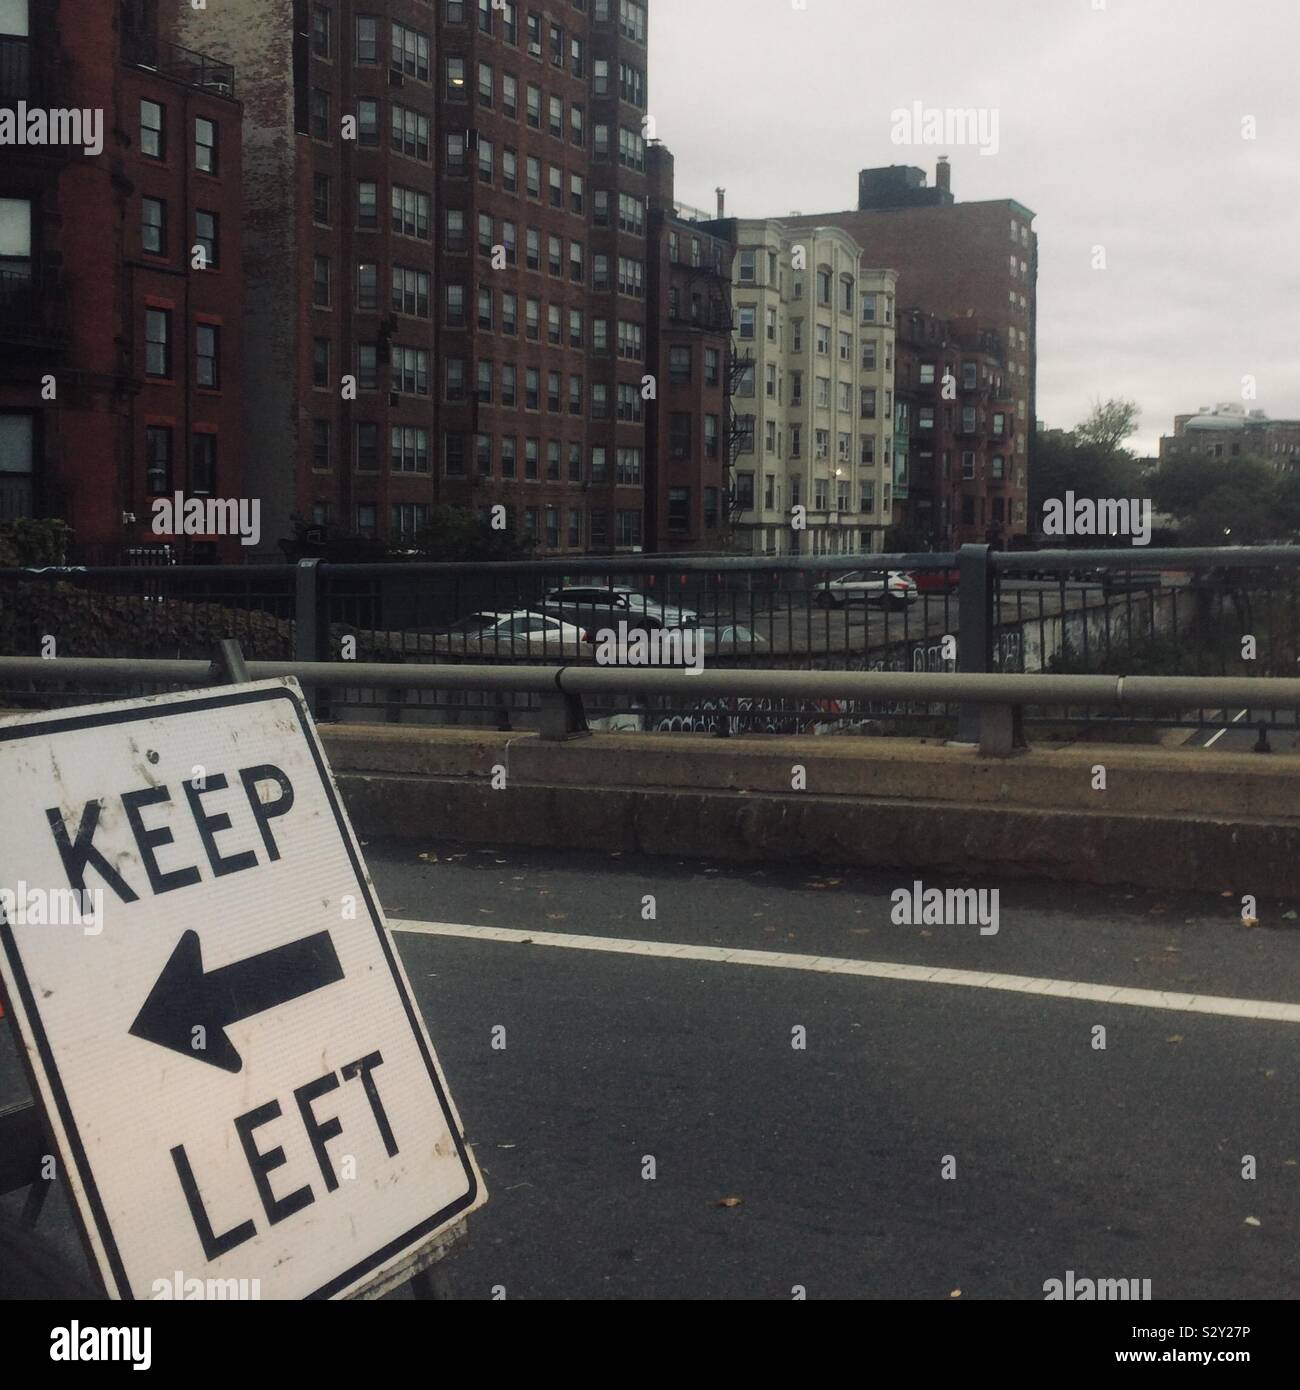 Keep left sign in city Stock Photo